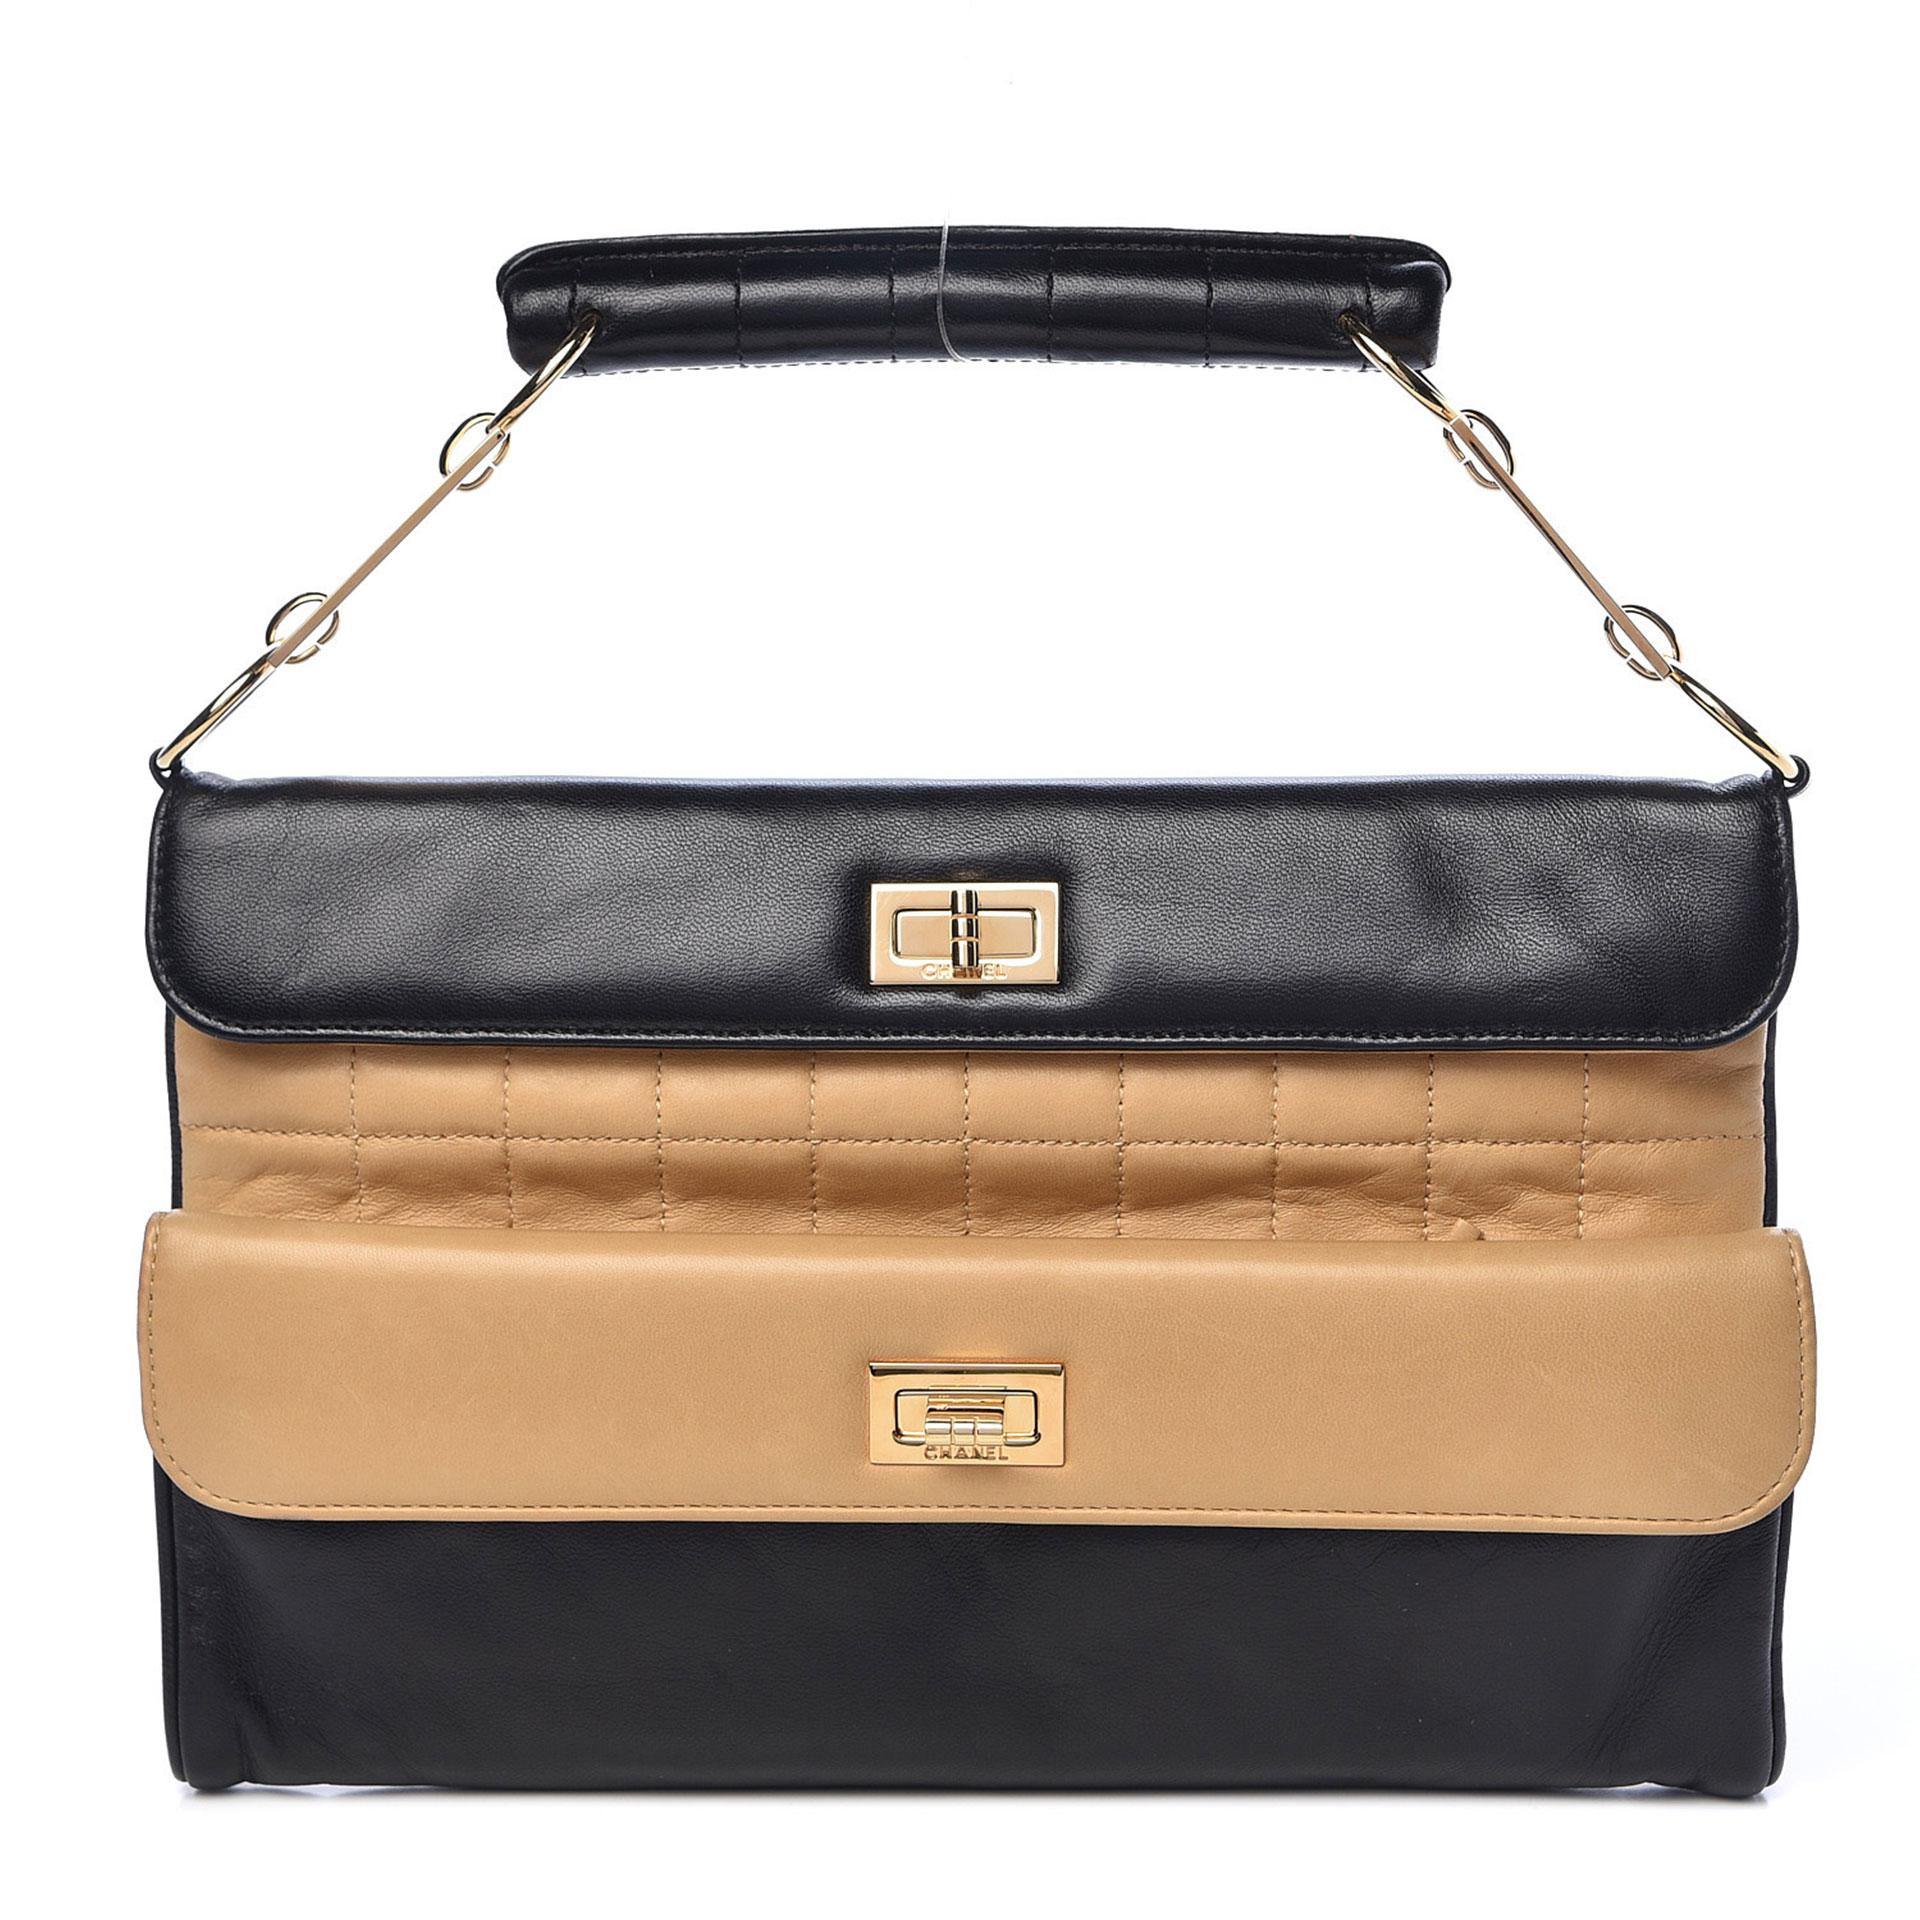 Chanel Mini Two Tone Double Flap Mademoiselle Reissue Satchel 

This stylish clutch is crafted of beige and black lambskin leather. The clutch features a black rolled leather handle with gold hardware and two separate flap openings each with a gold